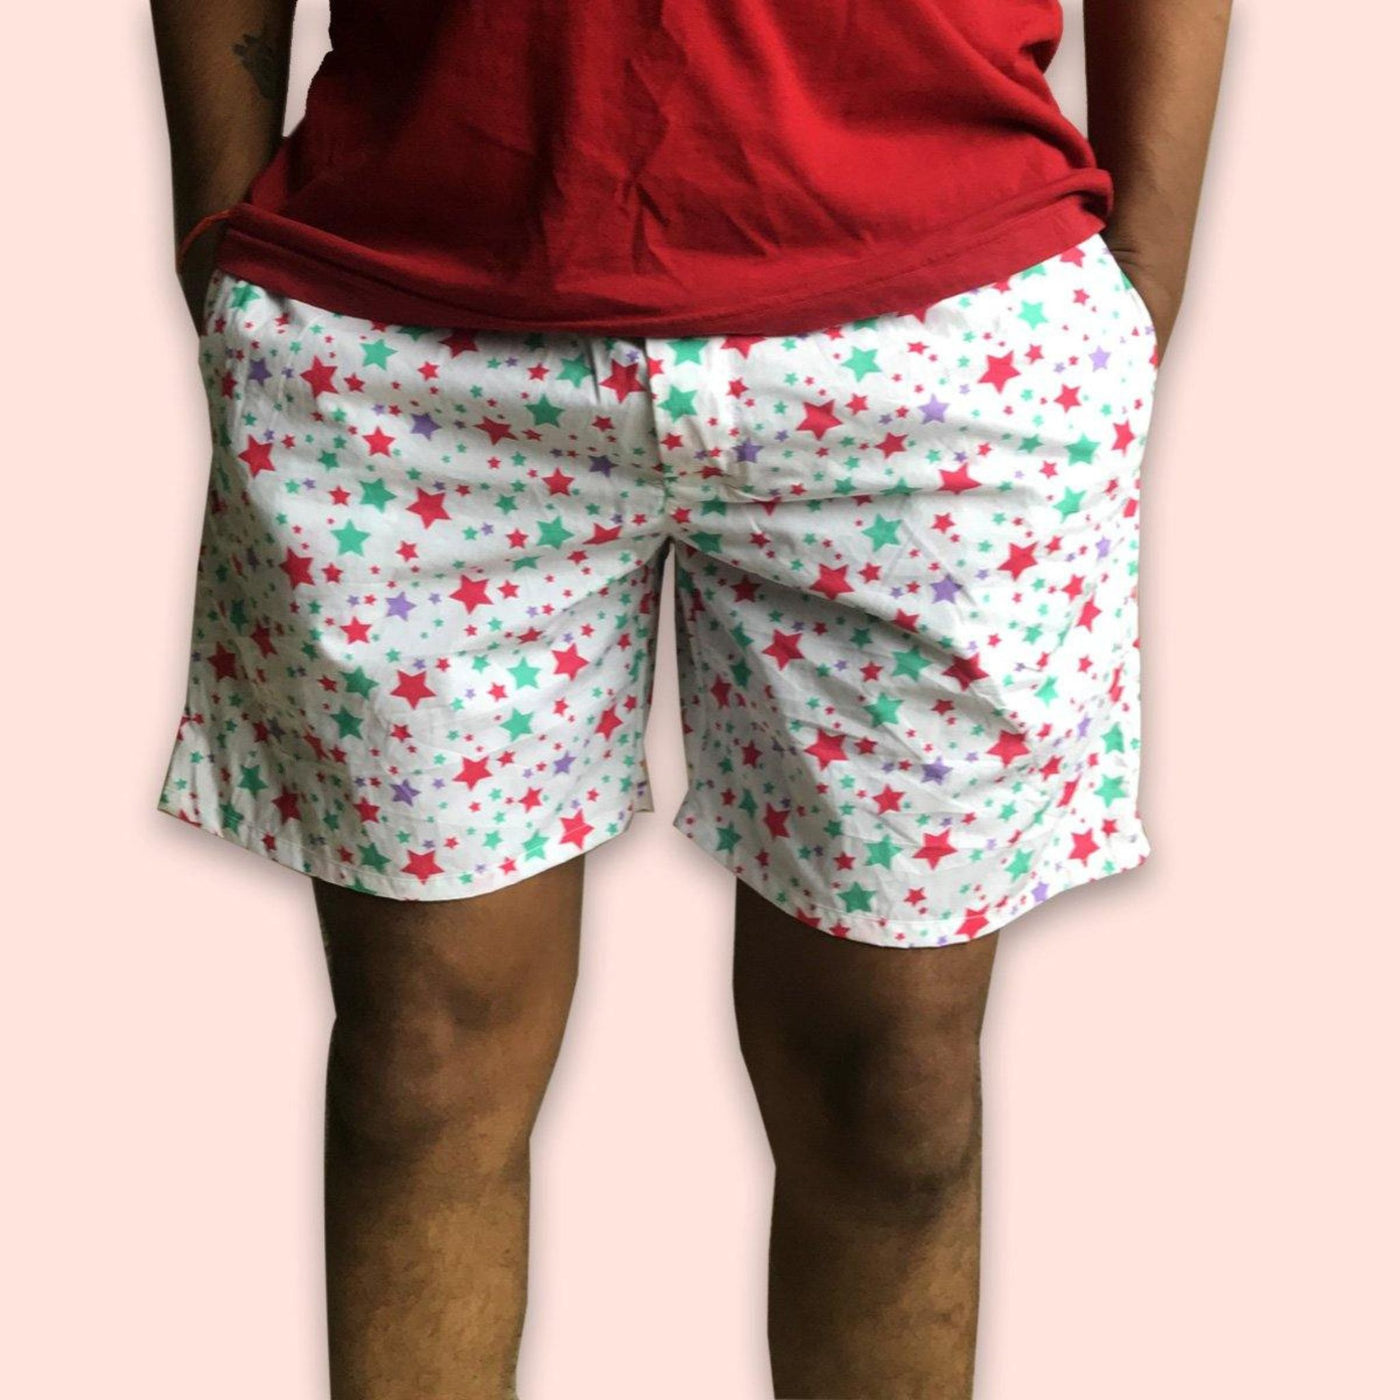 Boxer Shorts for Men - Colorful Stars Joeycare